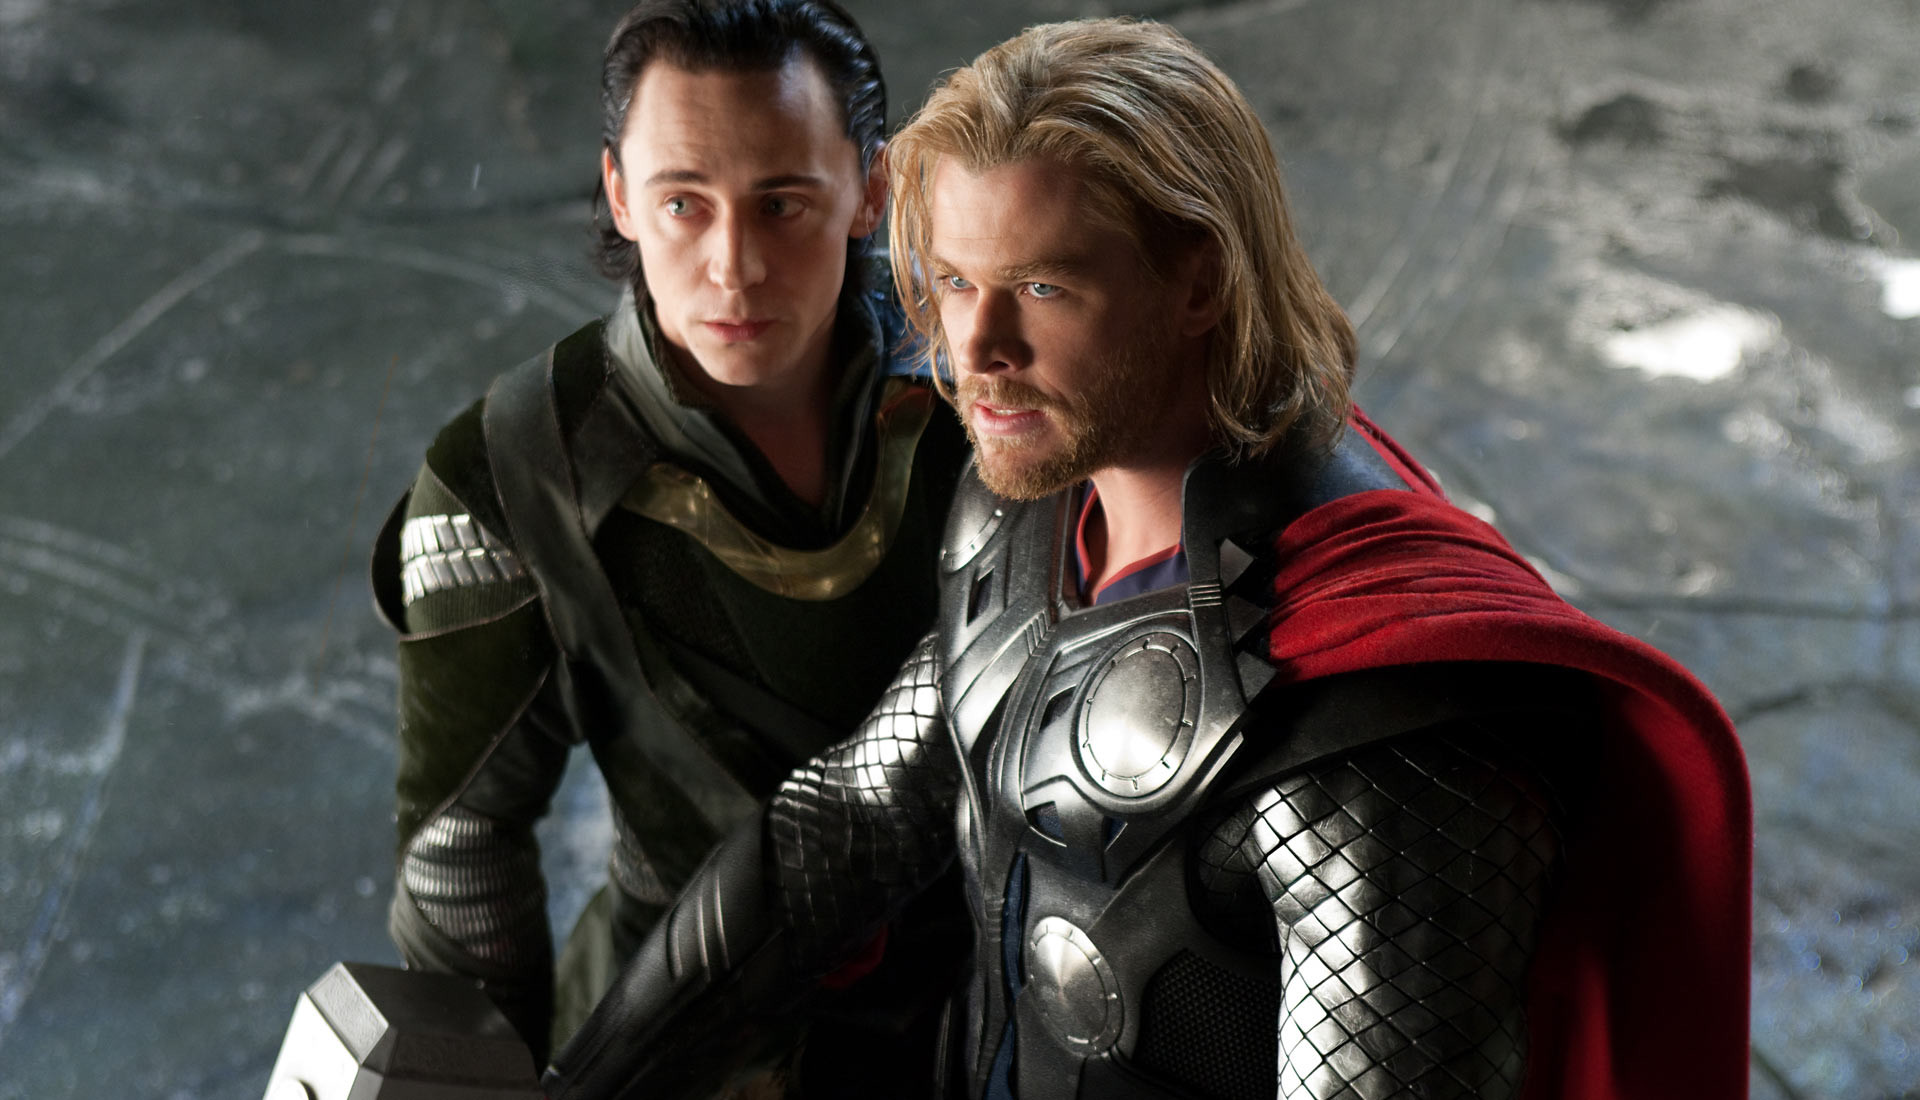 1920x1100 Cute Thor and Loki Photos and Pictures, Thor and Loki HQFX Wallpapers